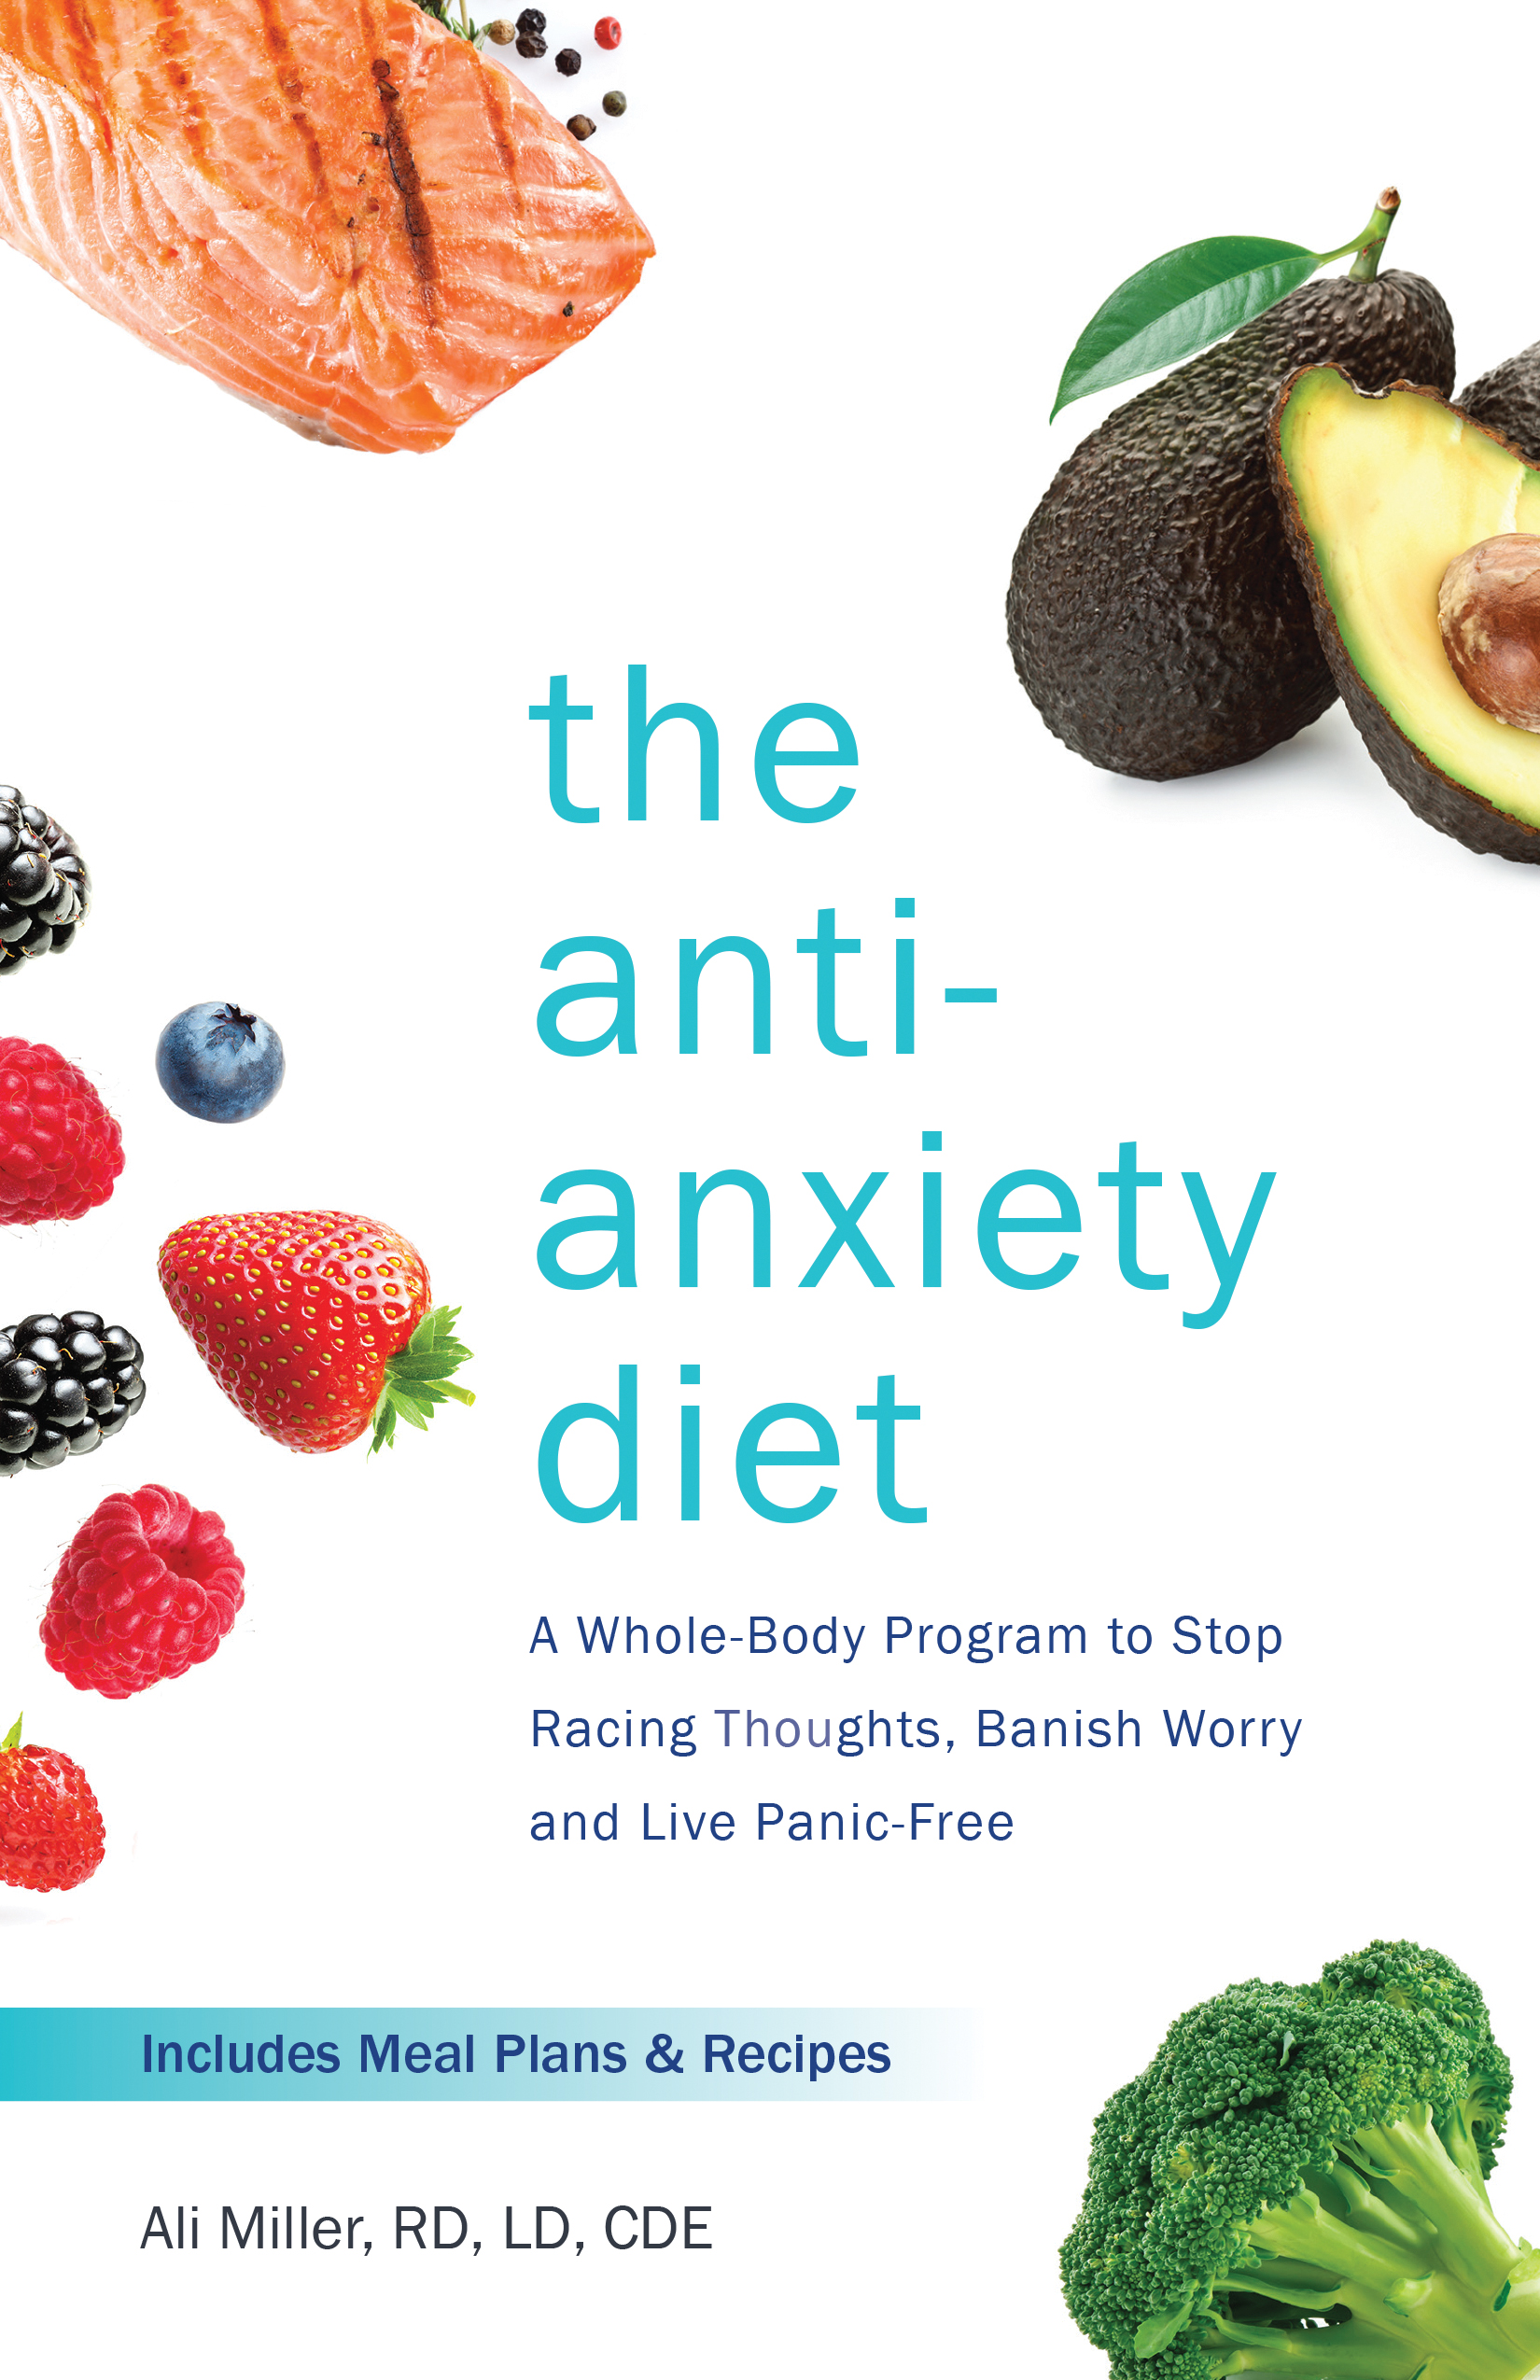 Anti-Anxiety_Diet-front.indd